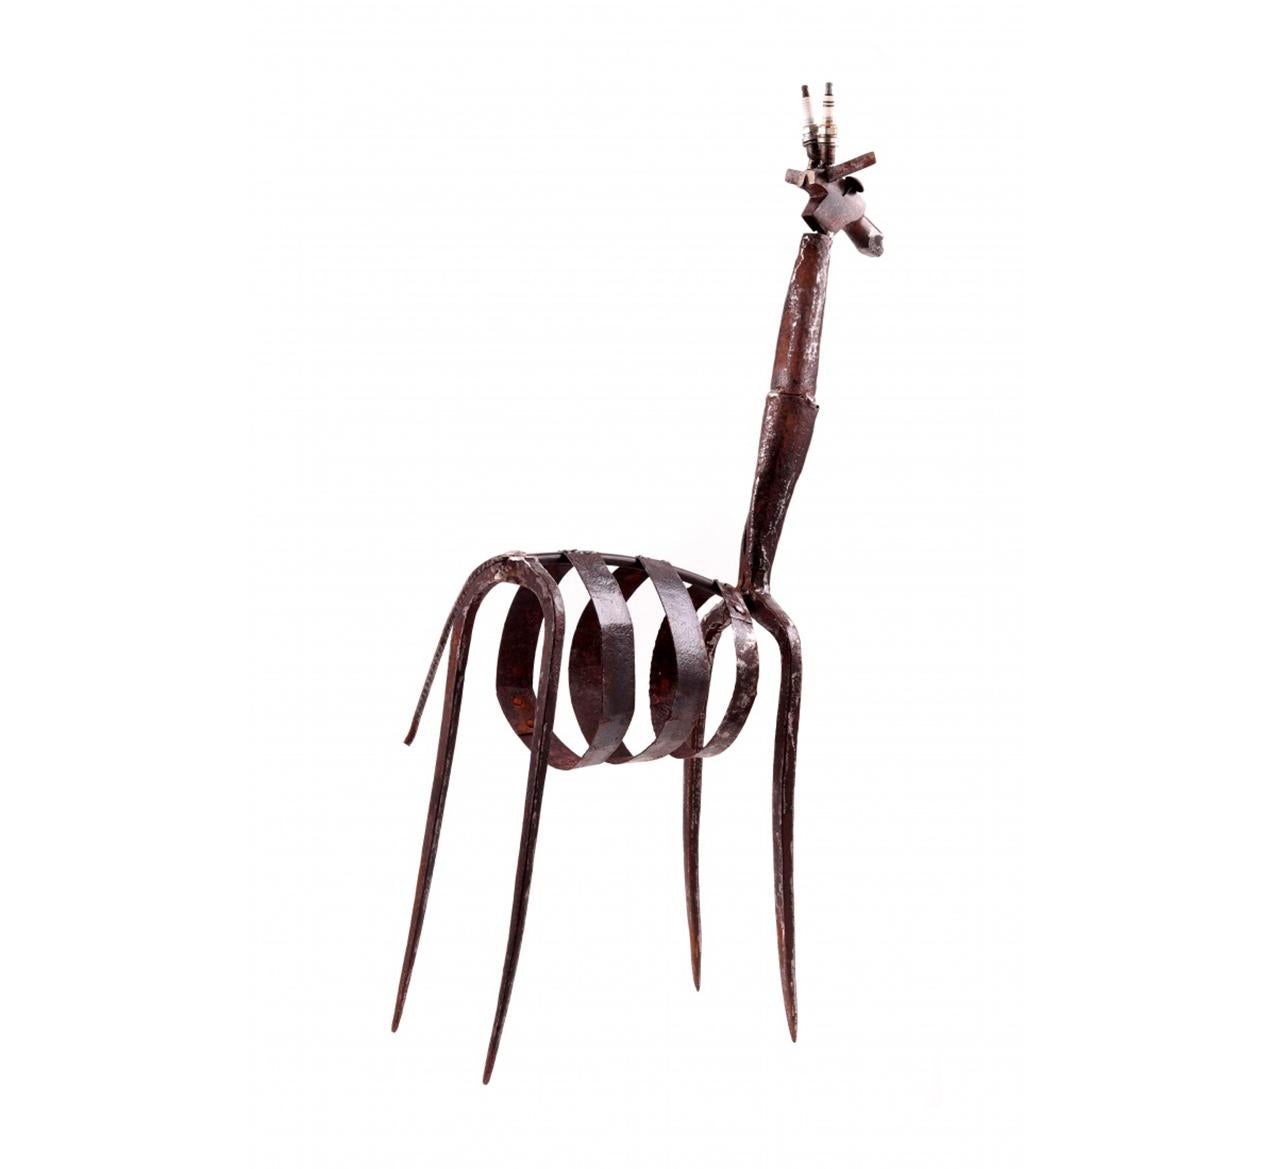 Contemporary Giraffe Sculpture Iron & Mixed Media w use of tools & other objects - Black Abstract Sculpture by JOSÉ JERÓNIMO